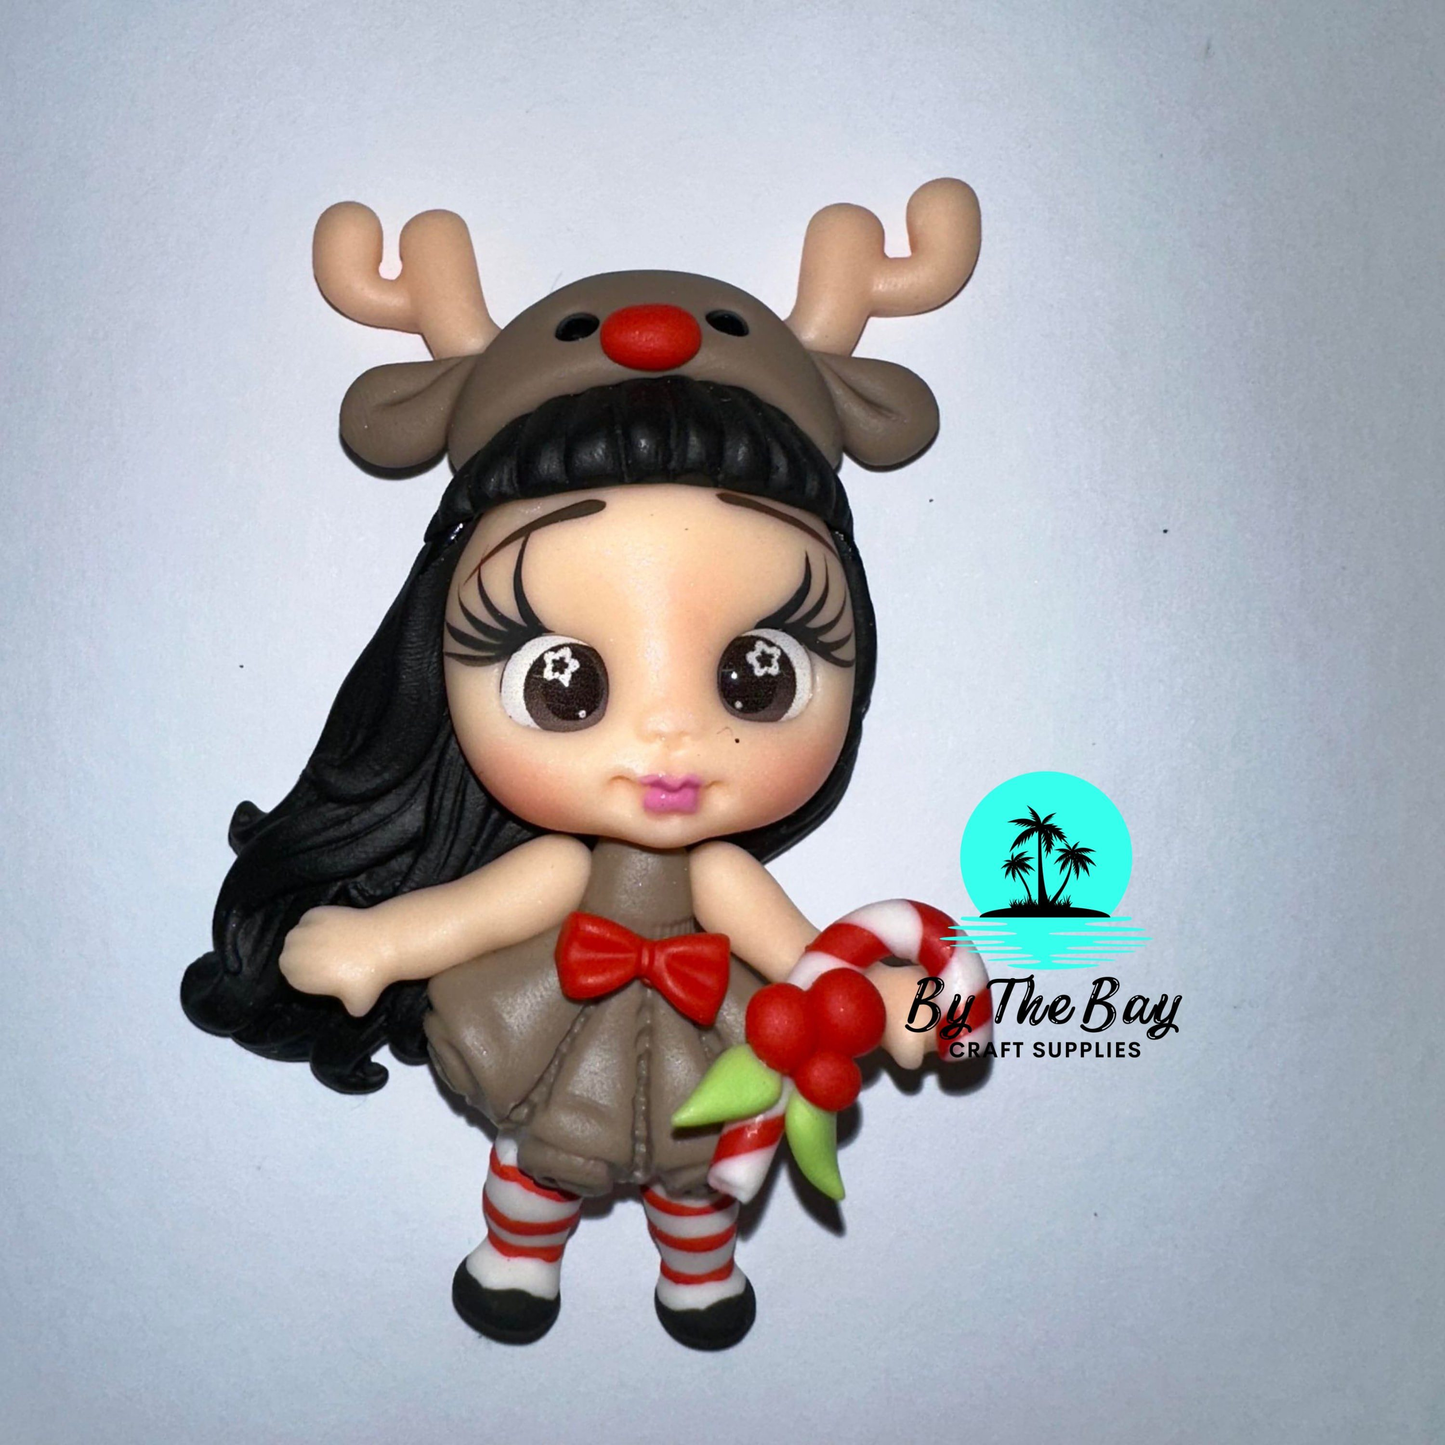 Girl dressed in deer costume with candy cane